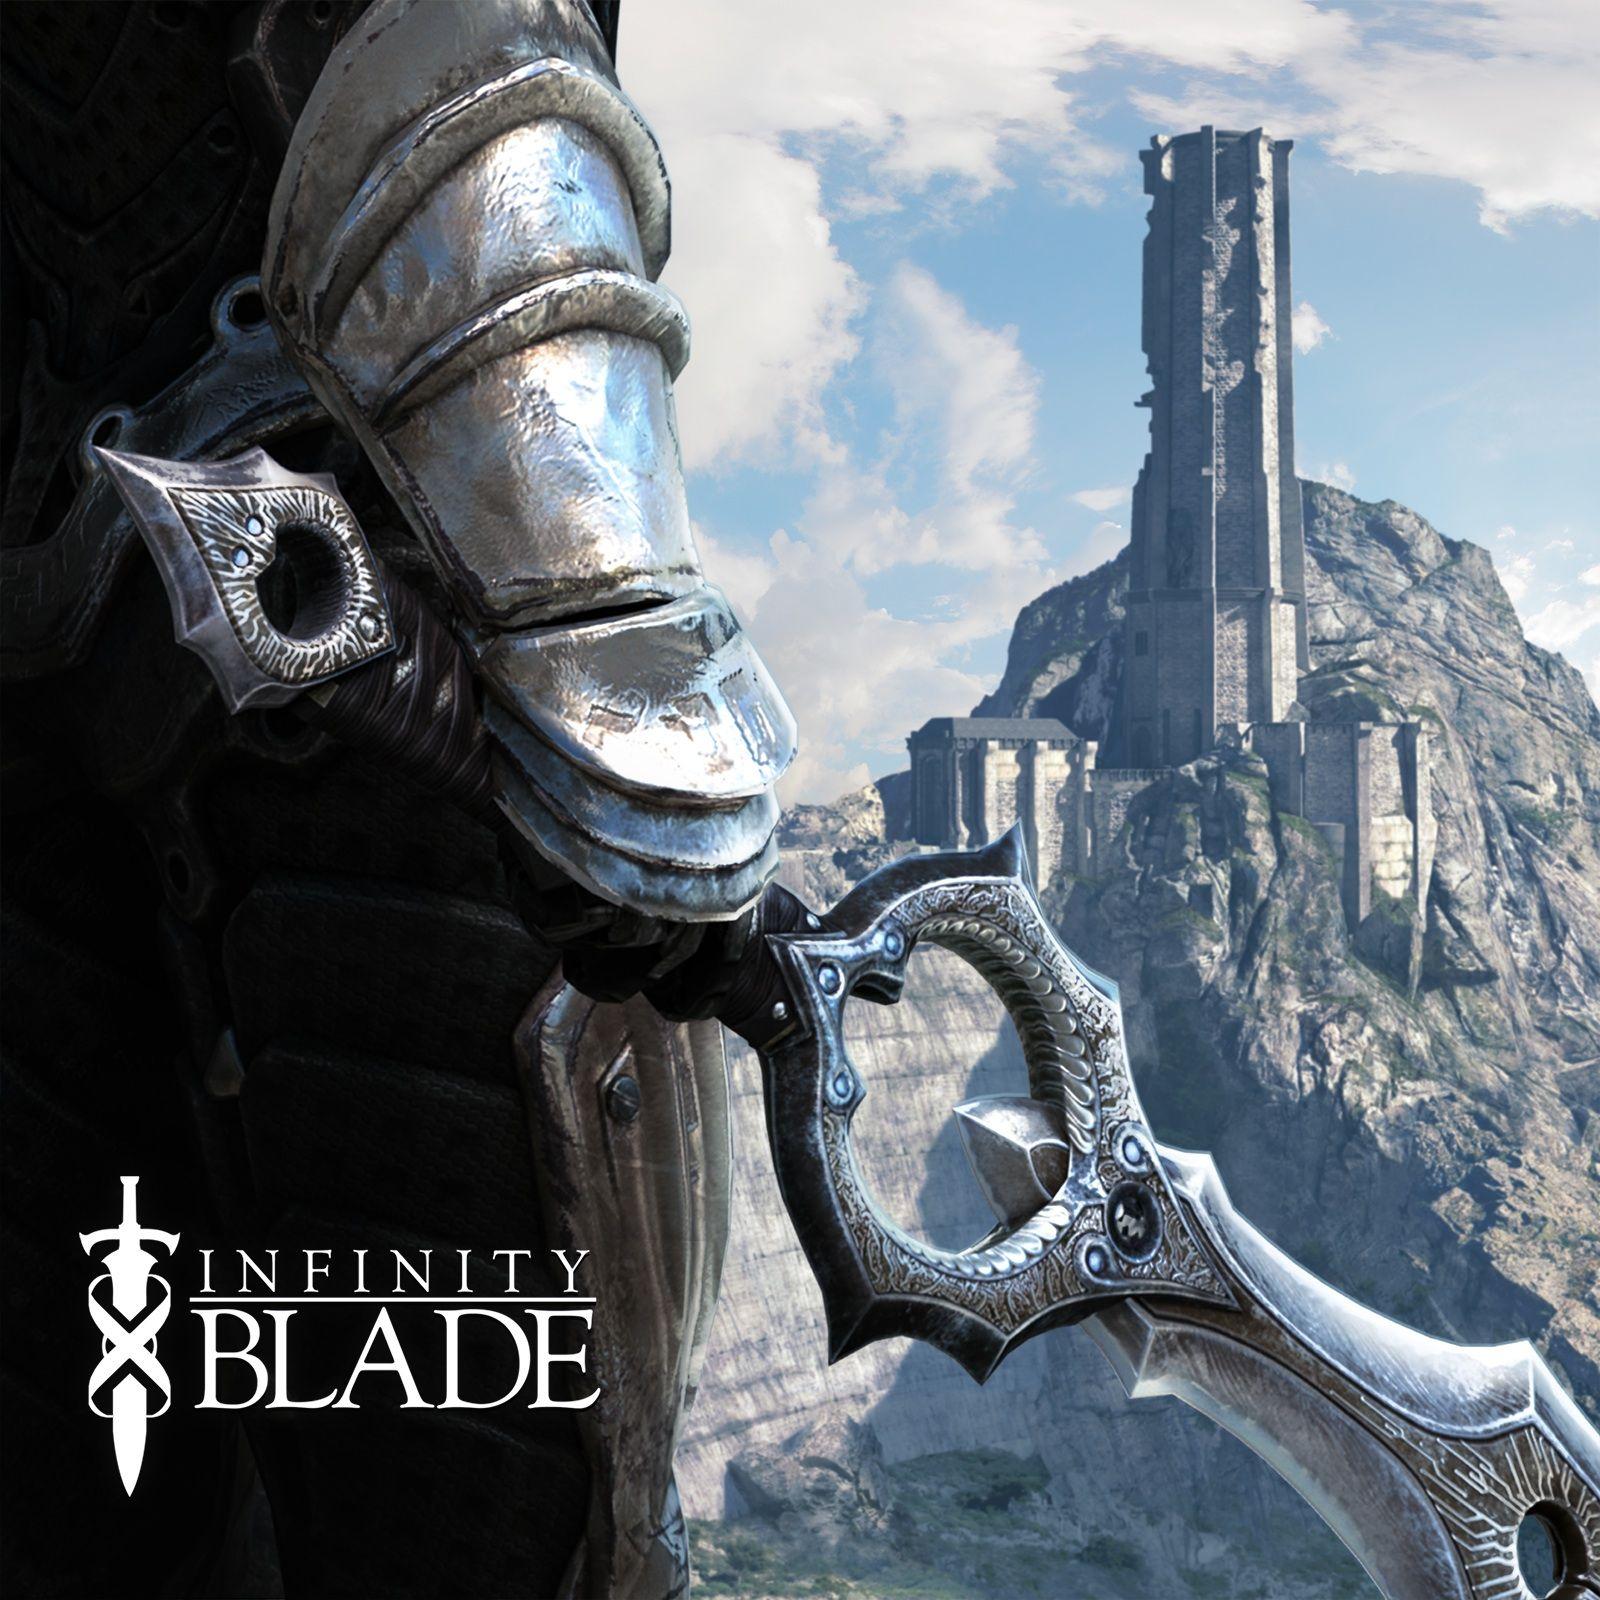 The Most Difficult Infinity Blade Trivia Quiz Ever!